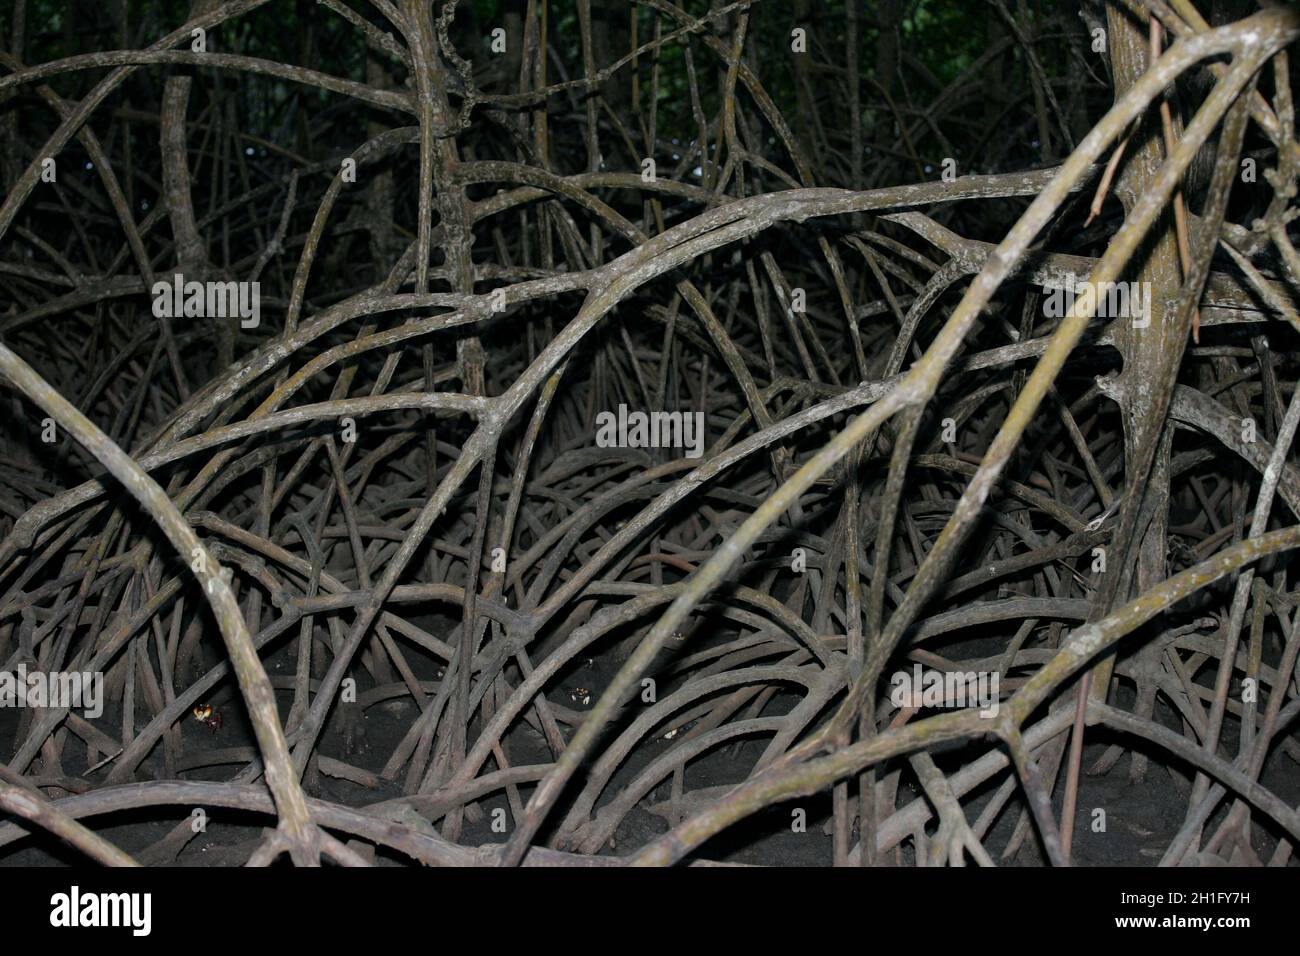 conde, bahia / brazil - march 28, 2013: mangrove roots are seen at the mouth of the Itapucuru River in the district of Siribinha, municipality of Cond Stock Photo